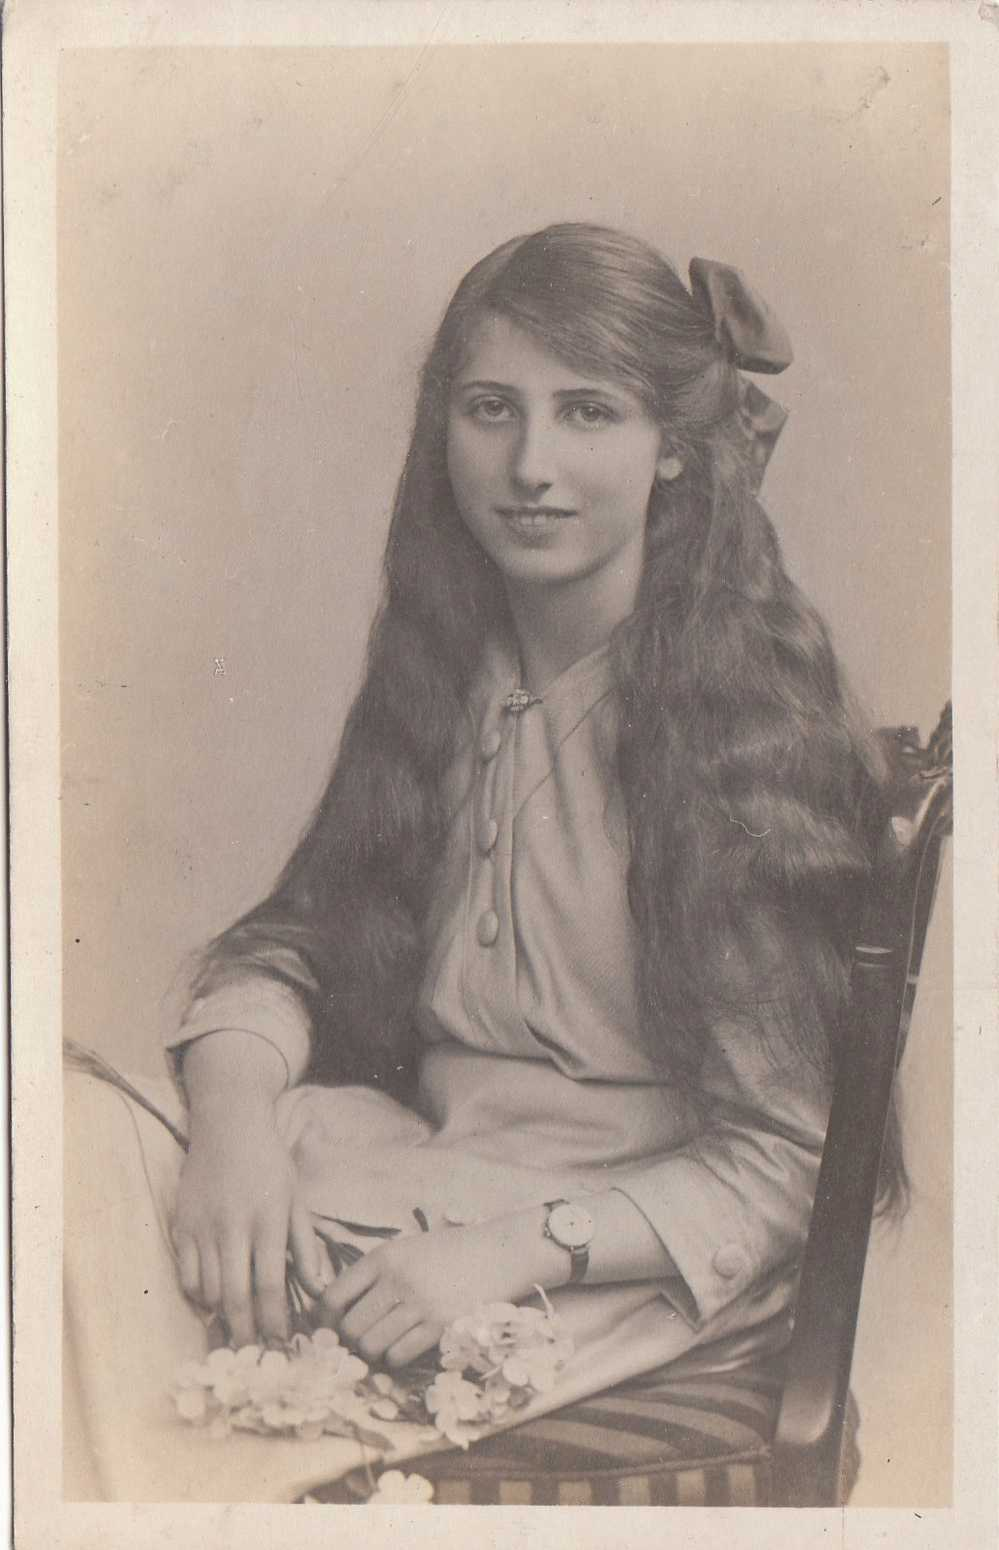 VERY YOUNG GIRL WITH VERY LONG HAIR  (GLM1668) - Femmes